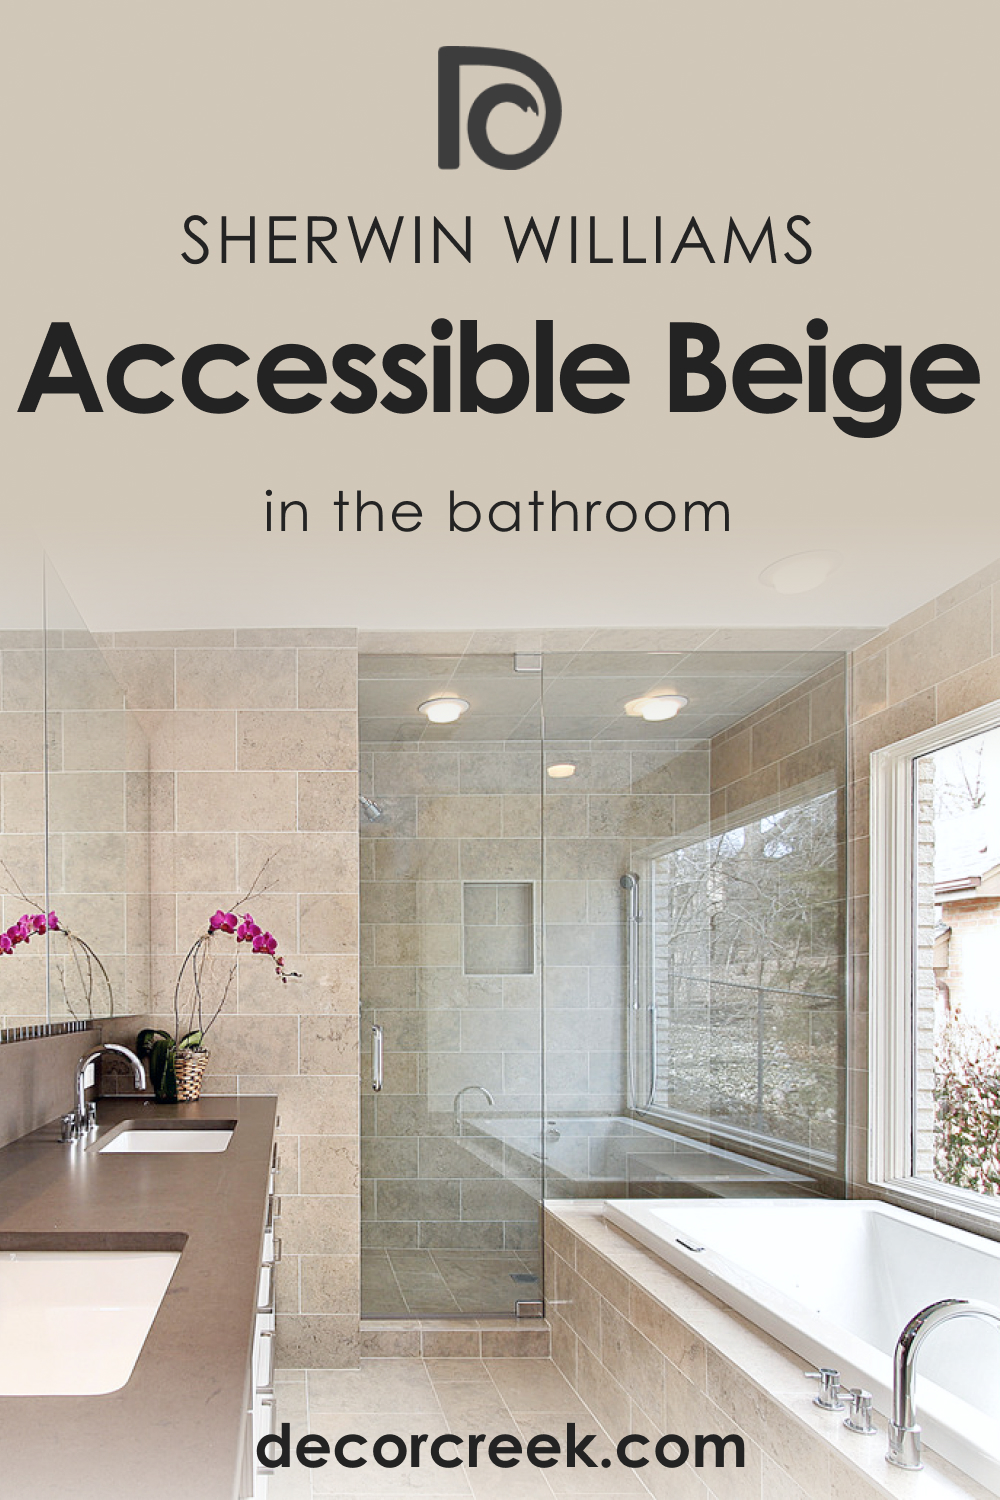 How to Use Accessible Beige SW 7036 in the Bathroom?